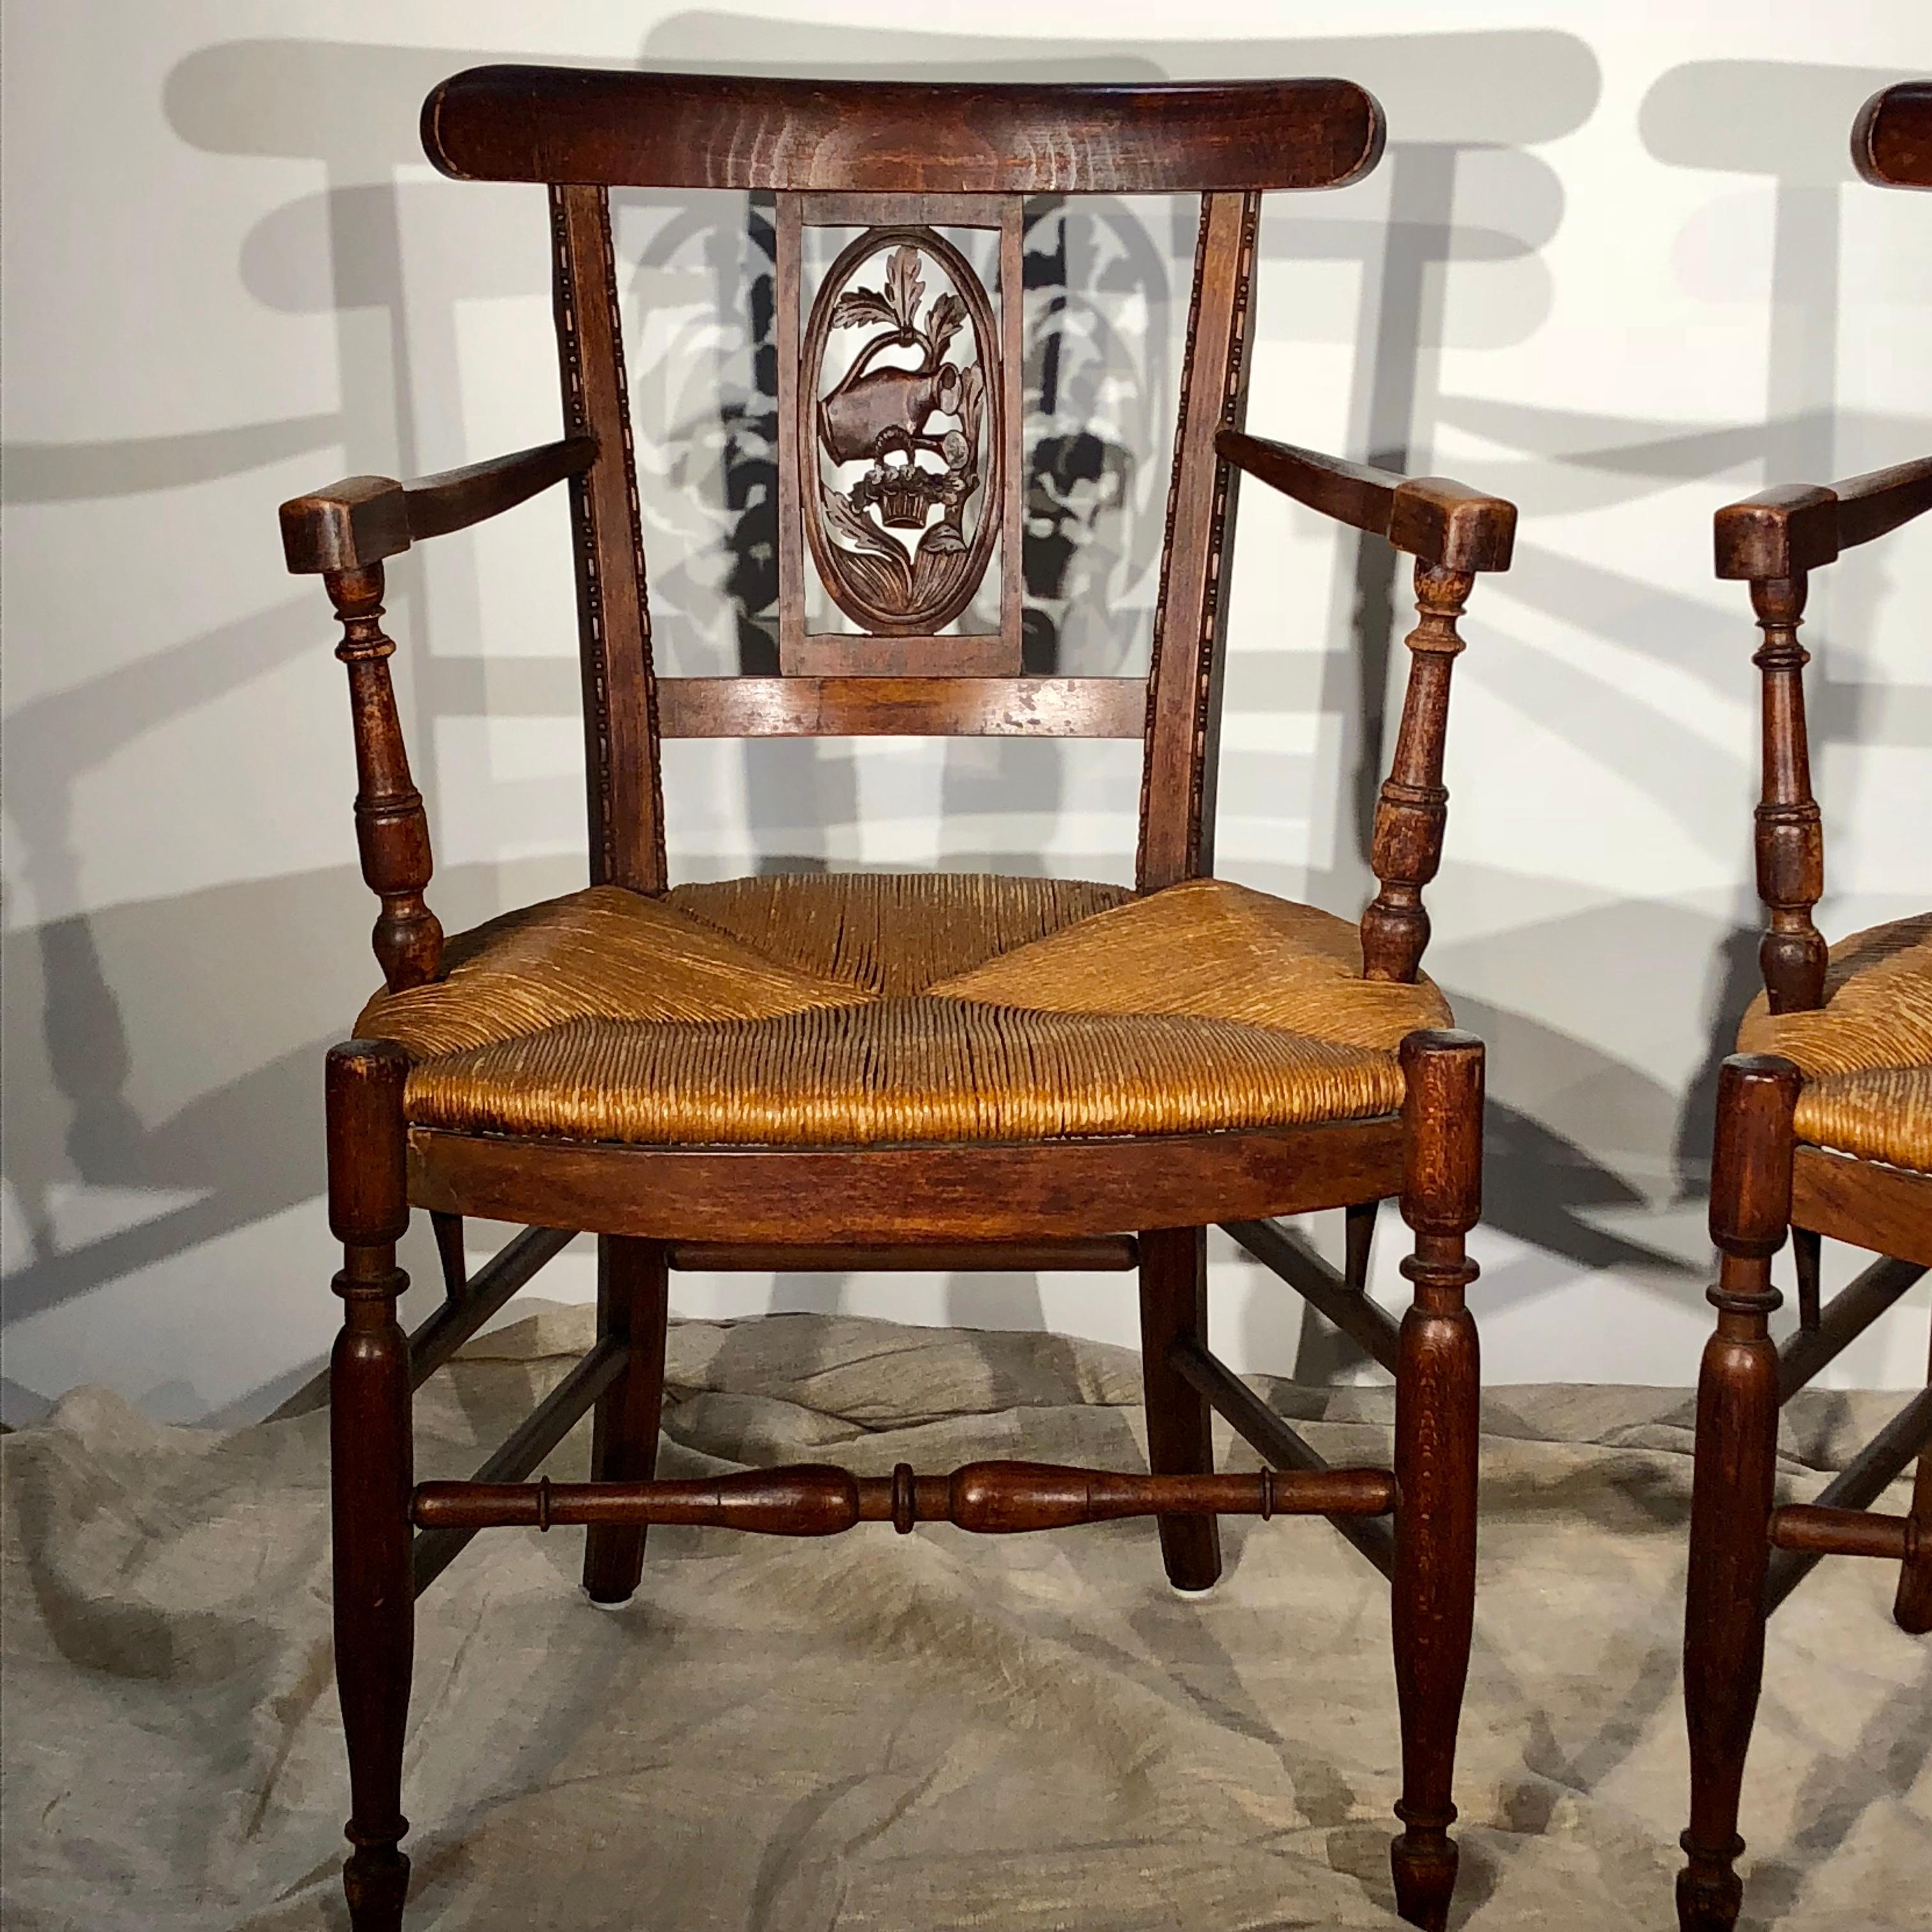 French Provincial Pair of French Country Armchairs, Garden Theme, 19th Century